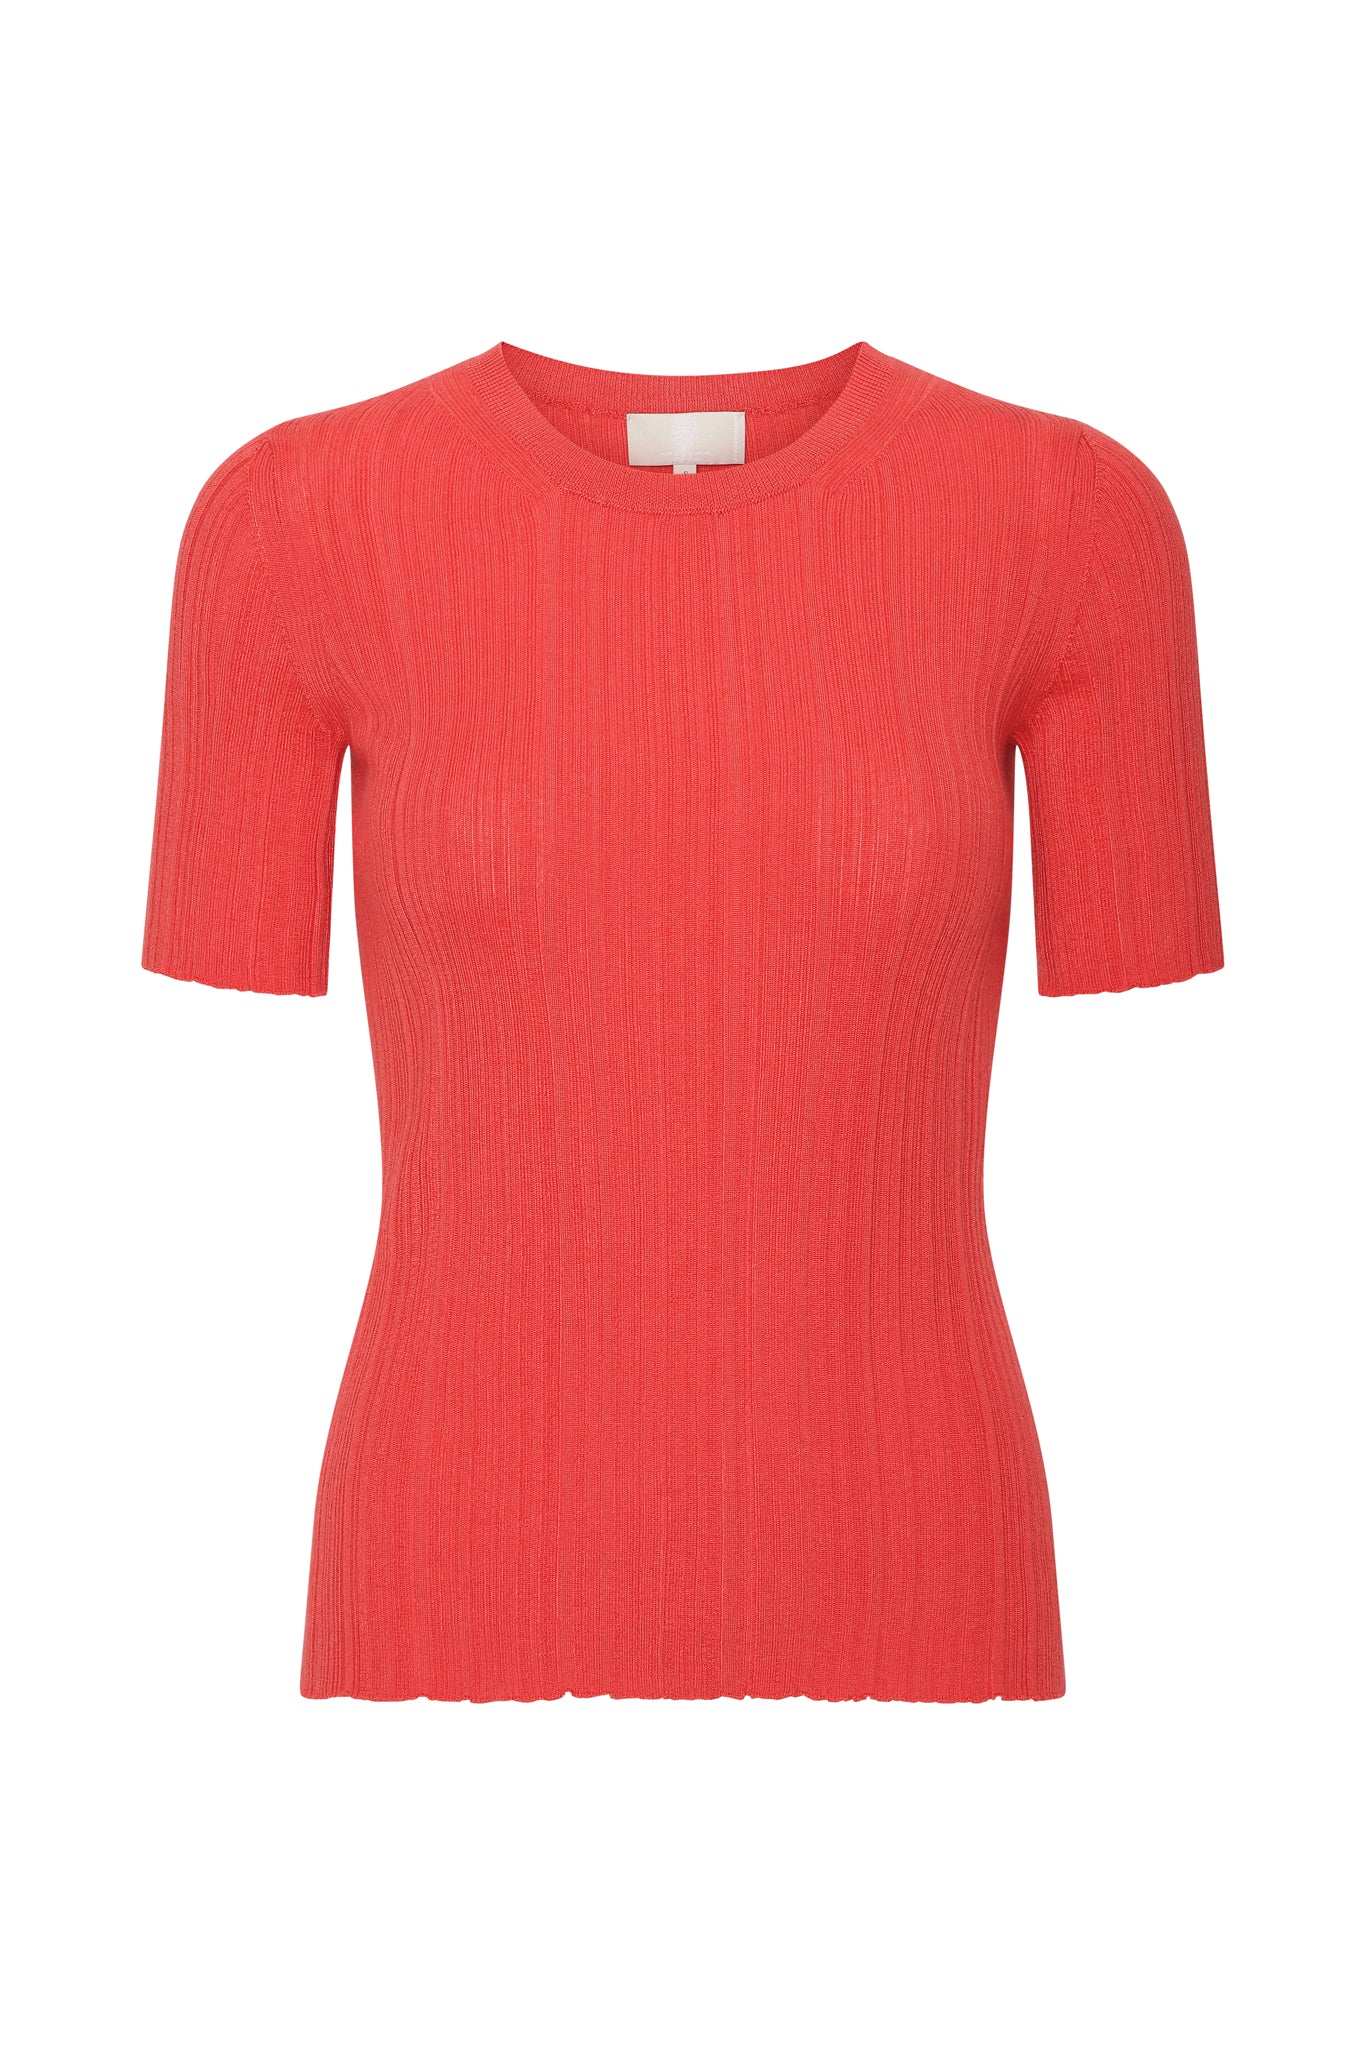 Lea - Cashmere Tee - Hot Coral